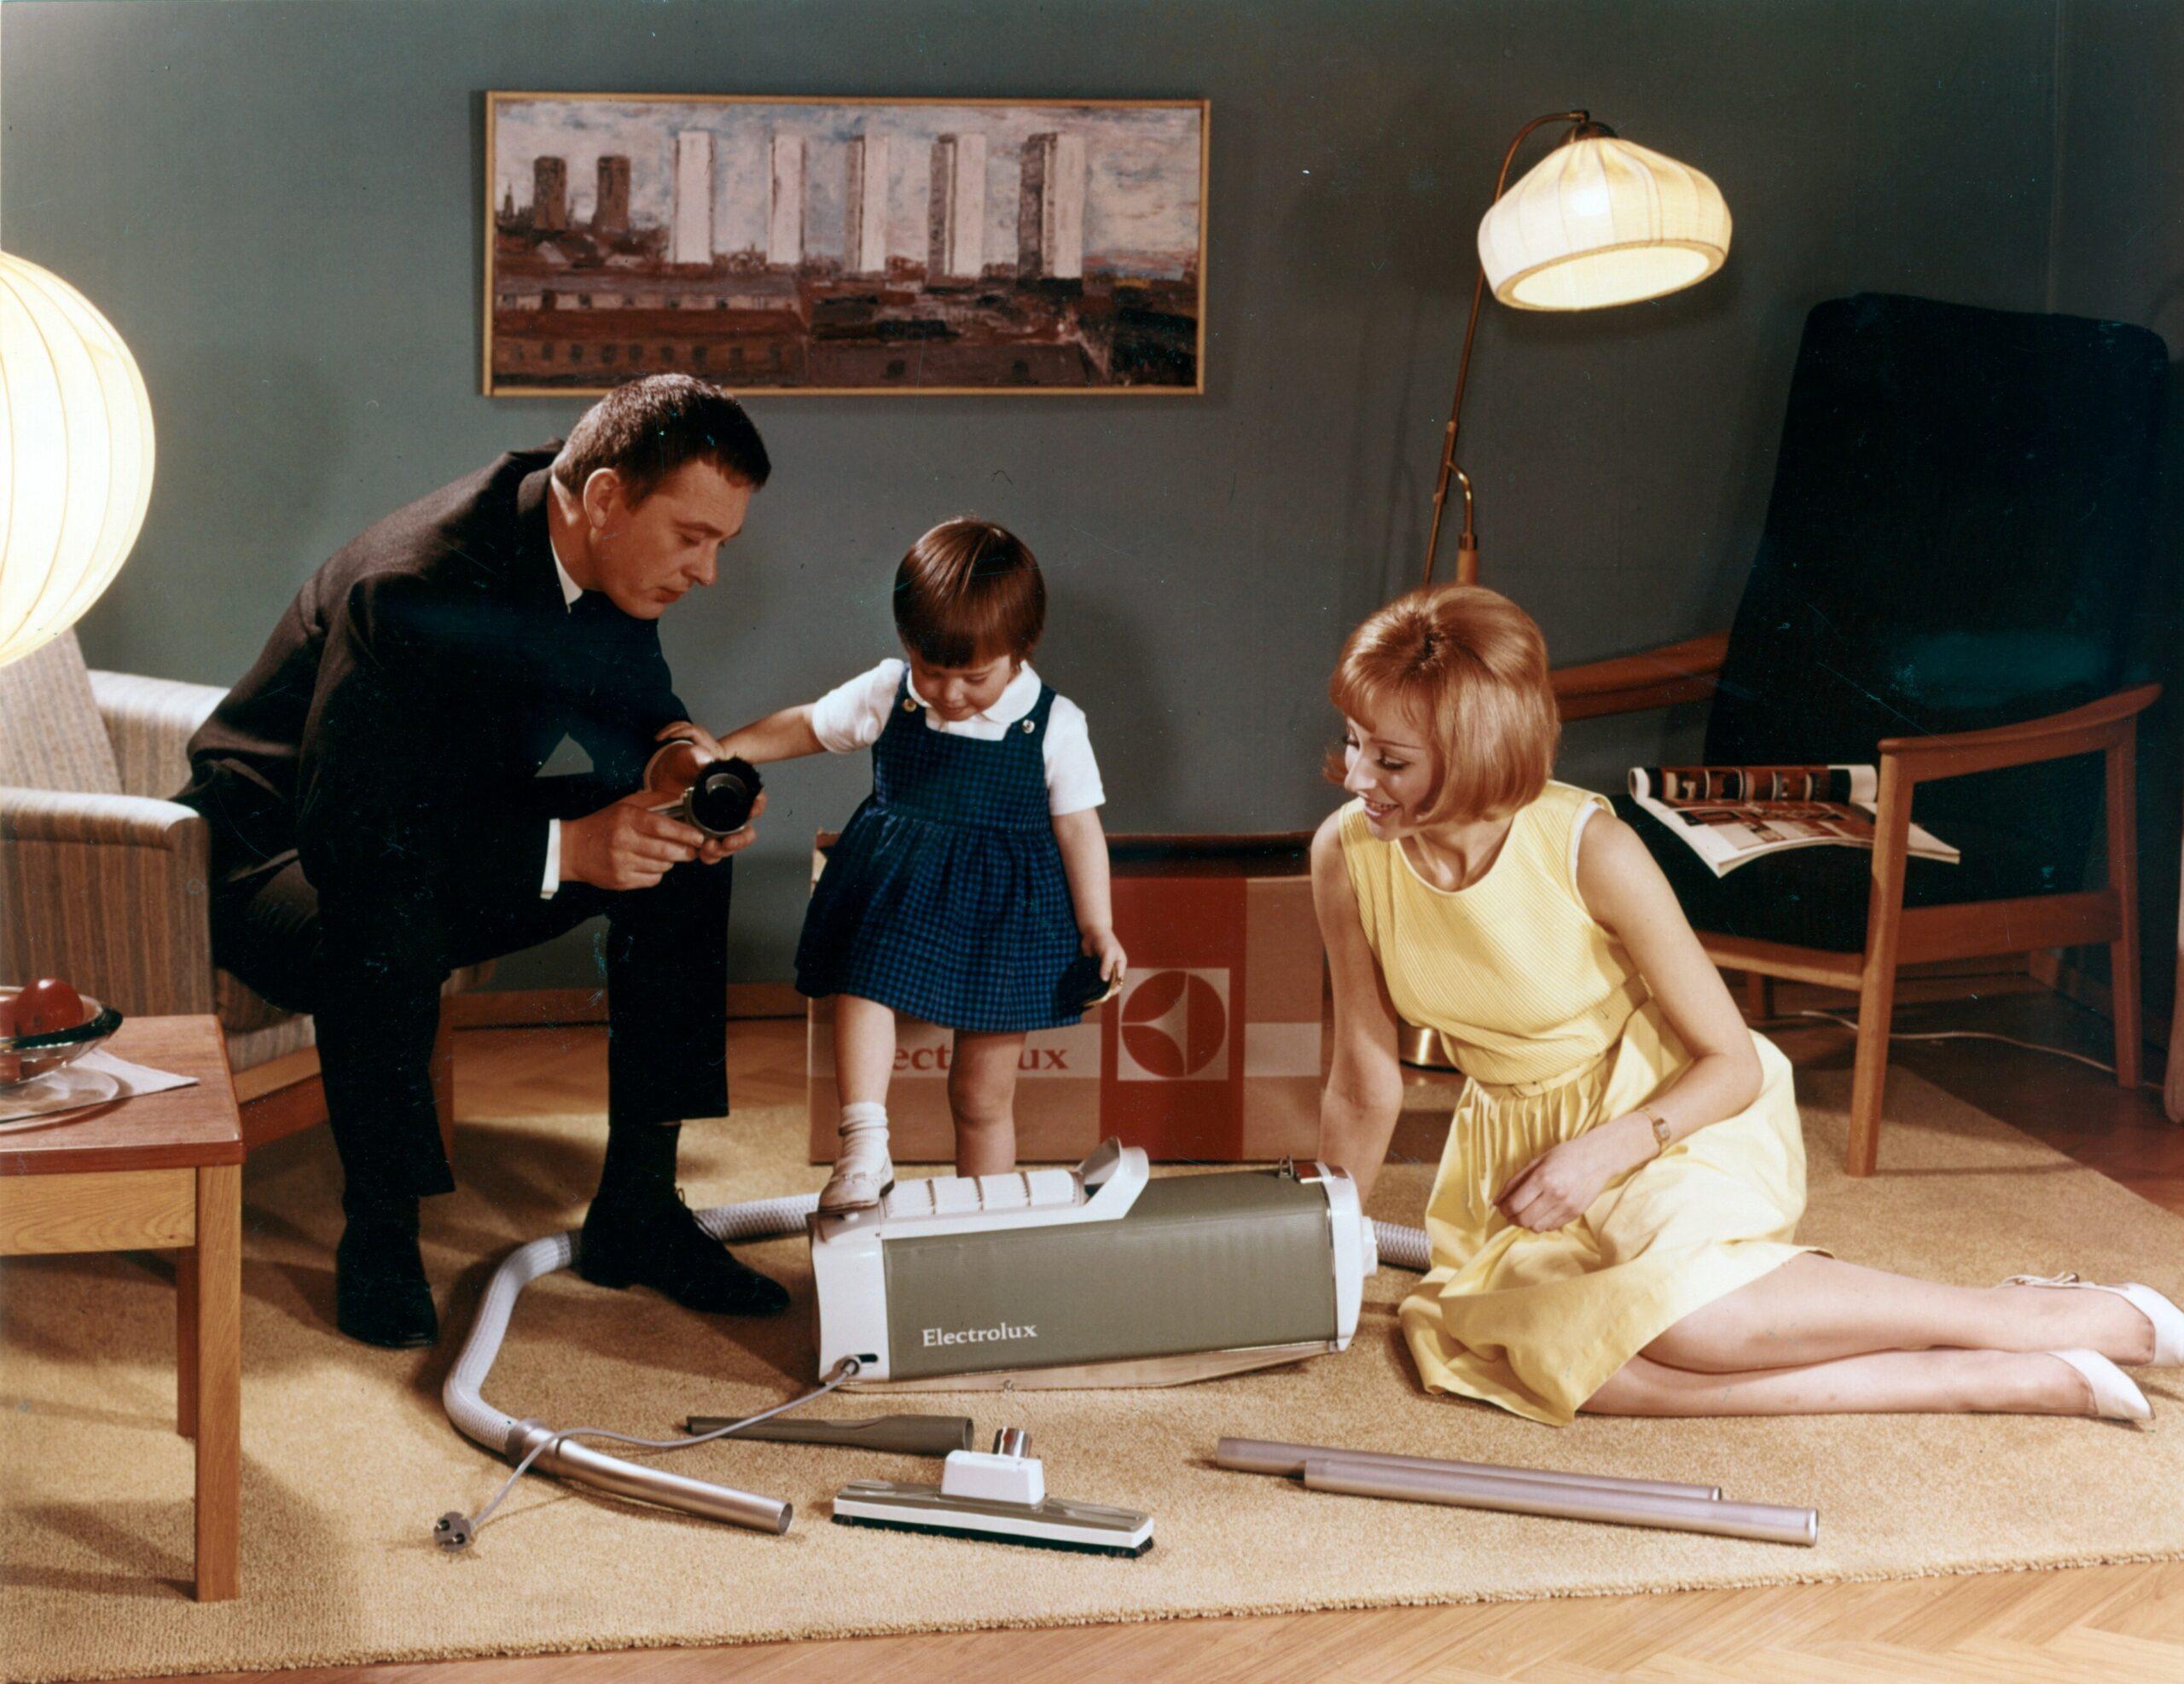 An old photo showing a mother, father and child in a living room, a vacuum cleaner in the middle.